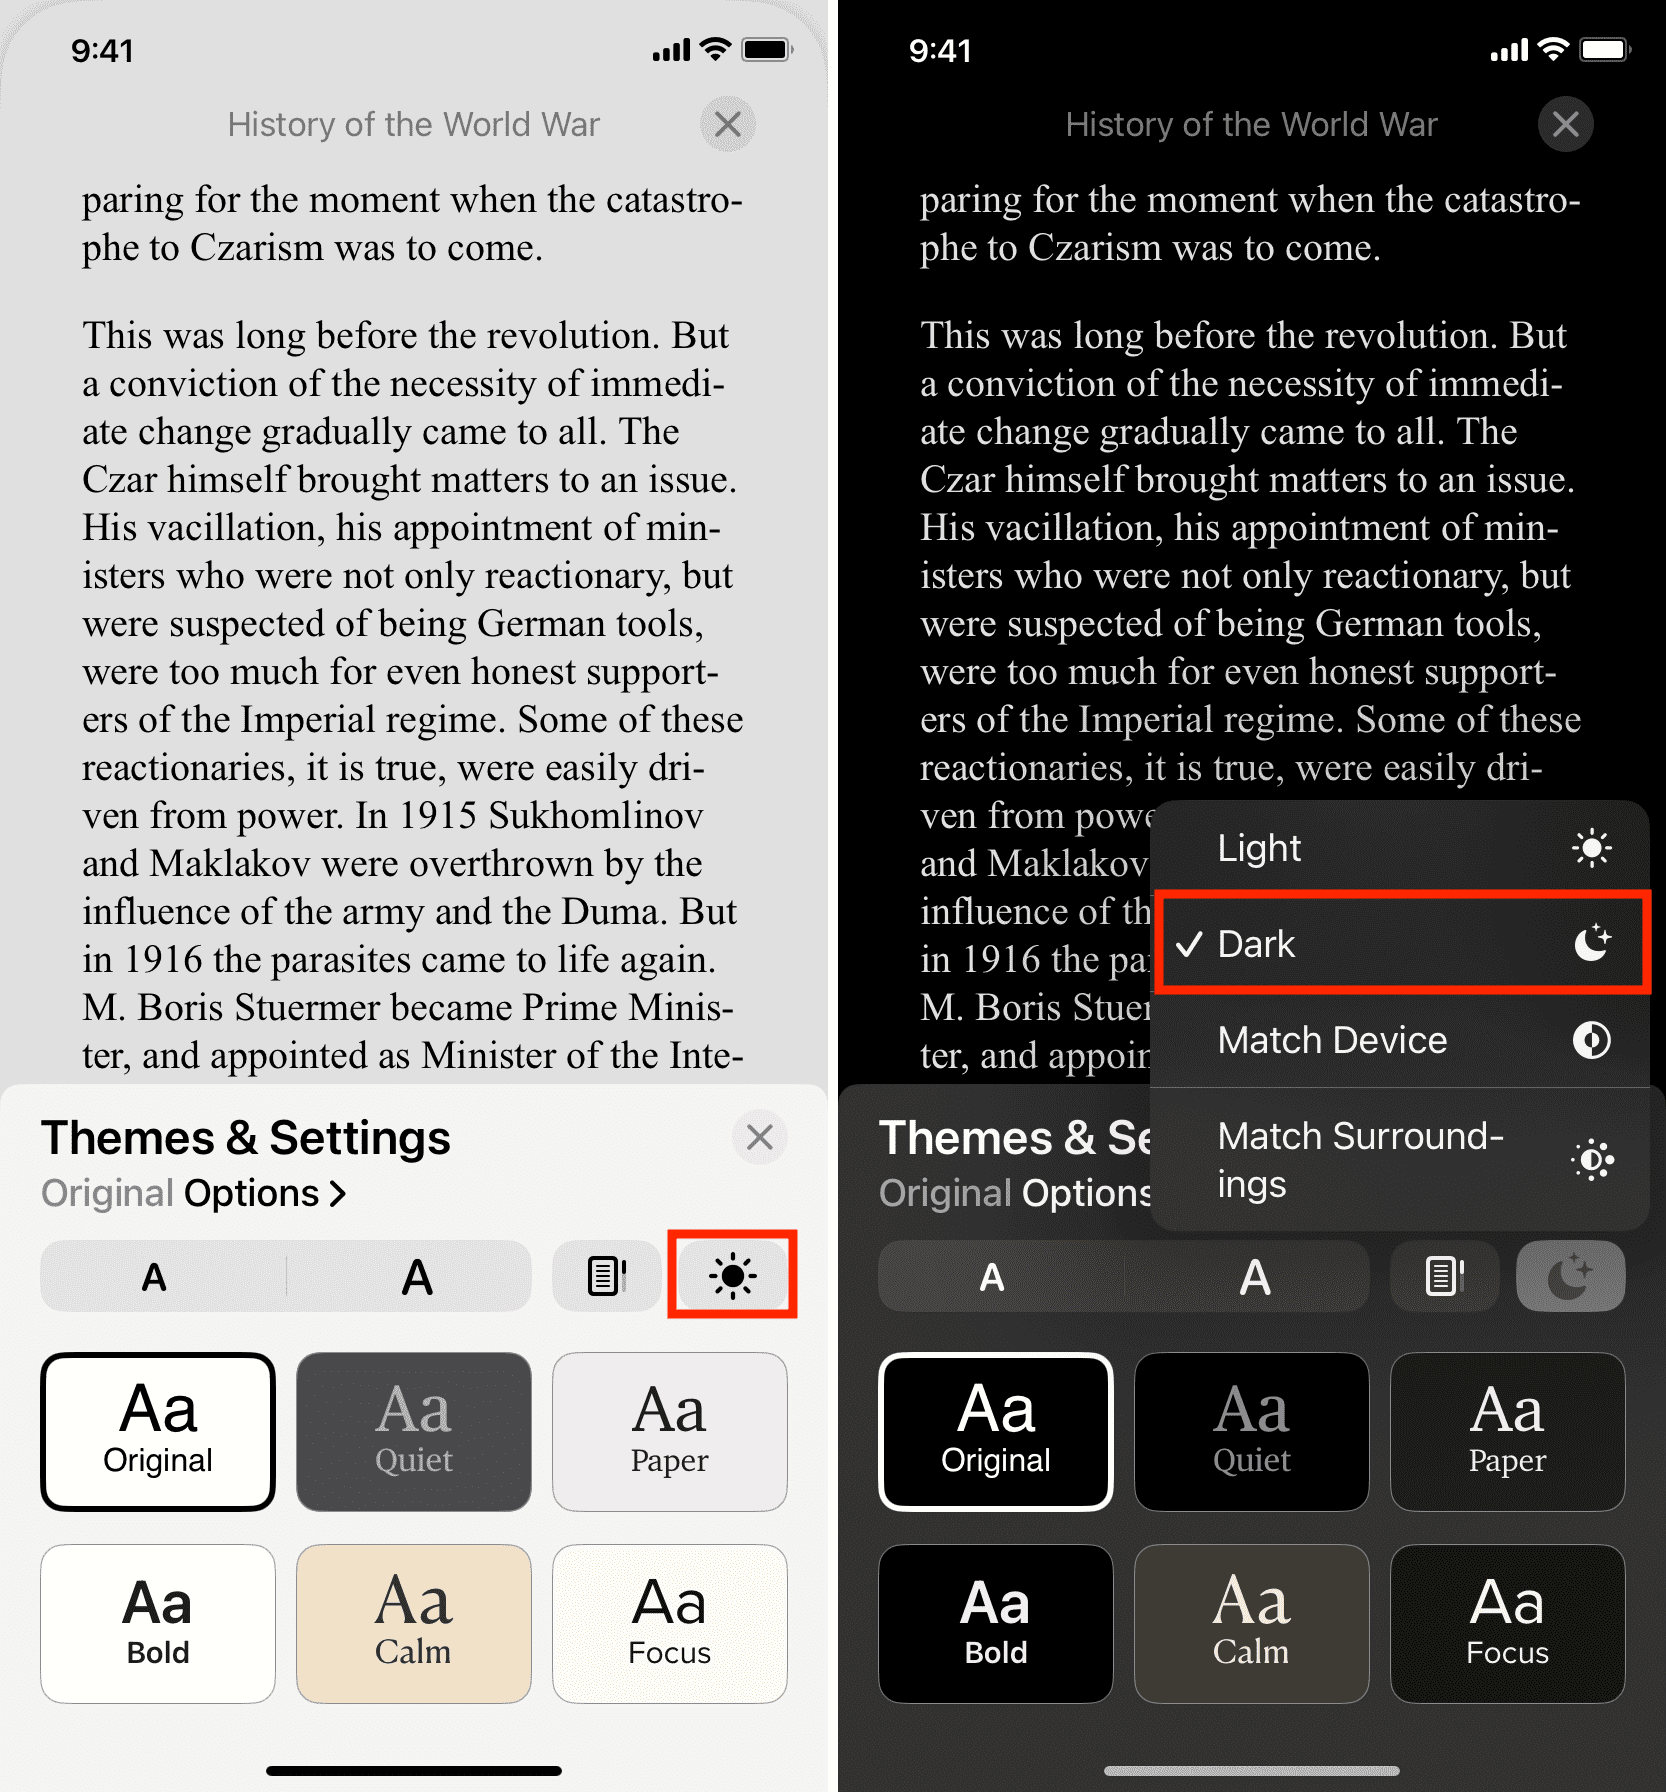 Enable Dark Mode for Books app on iPhone